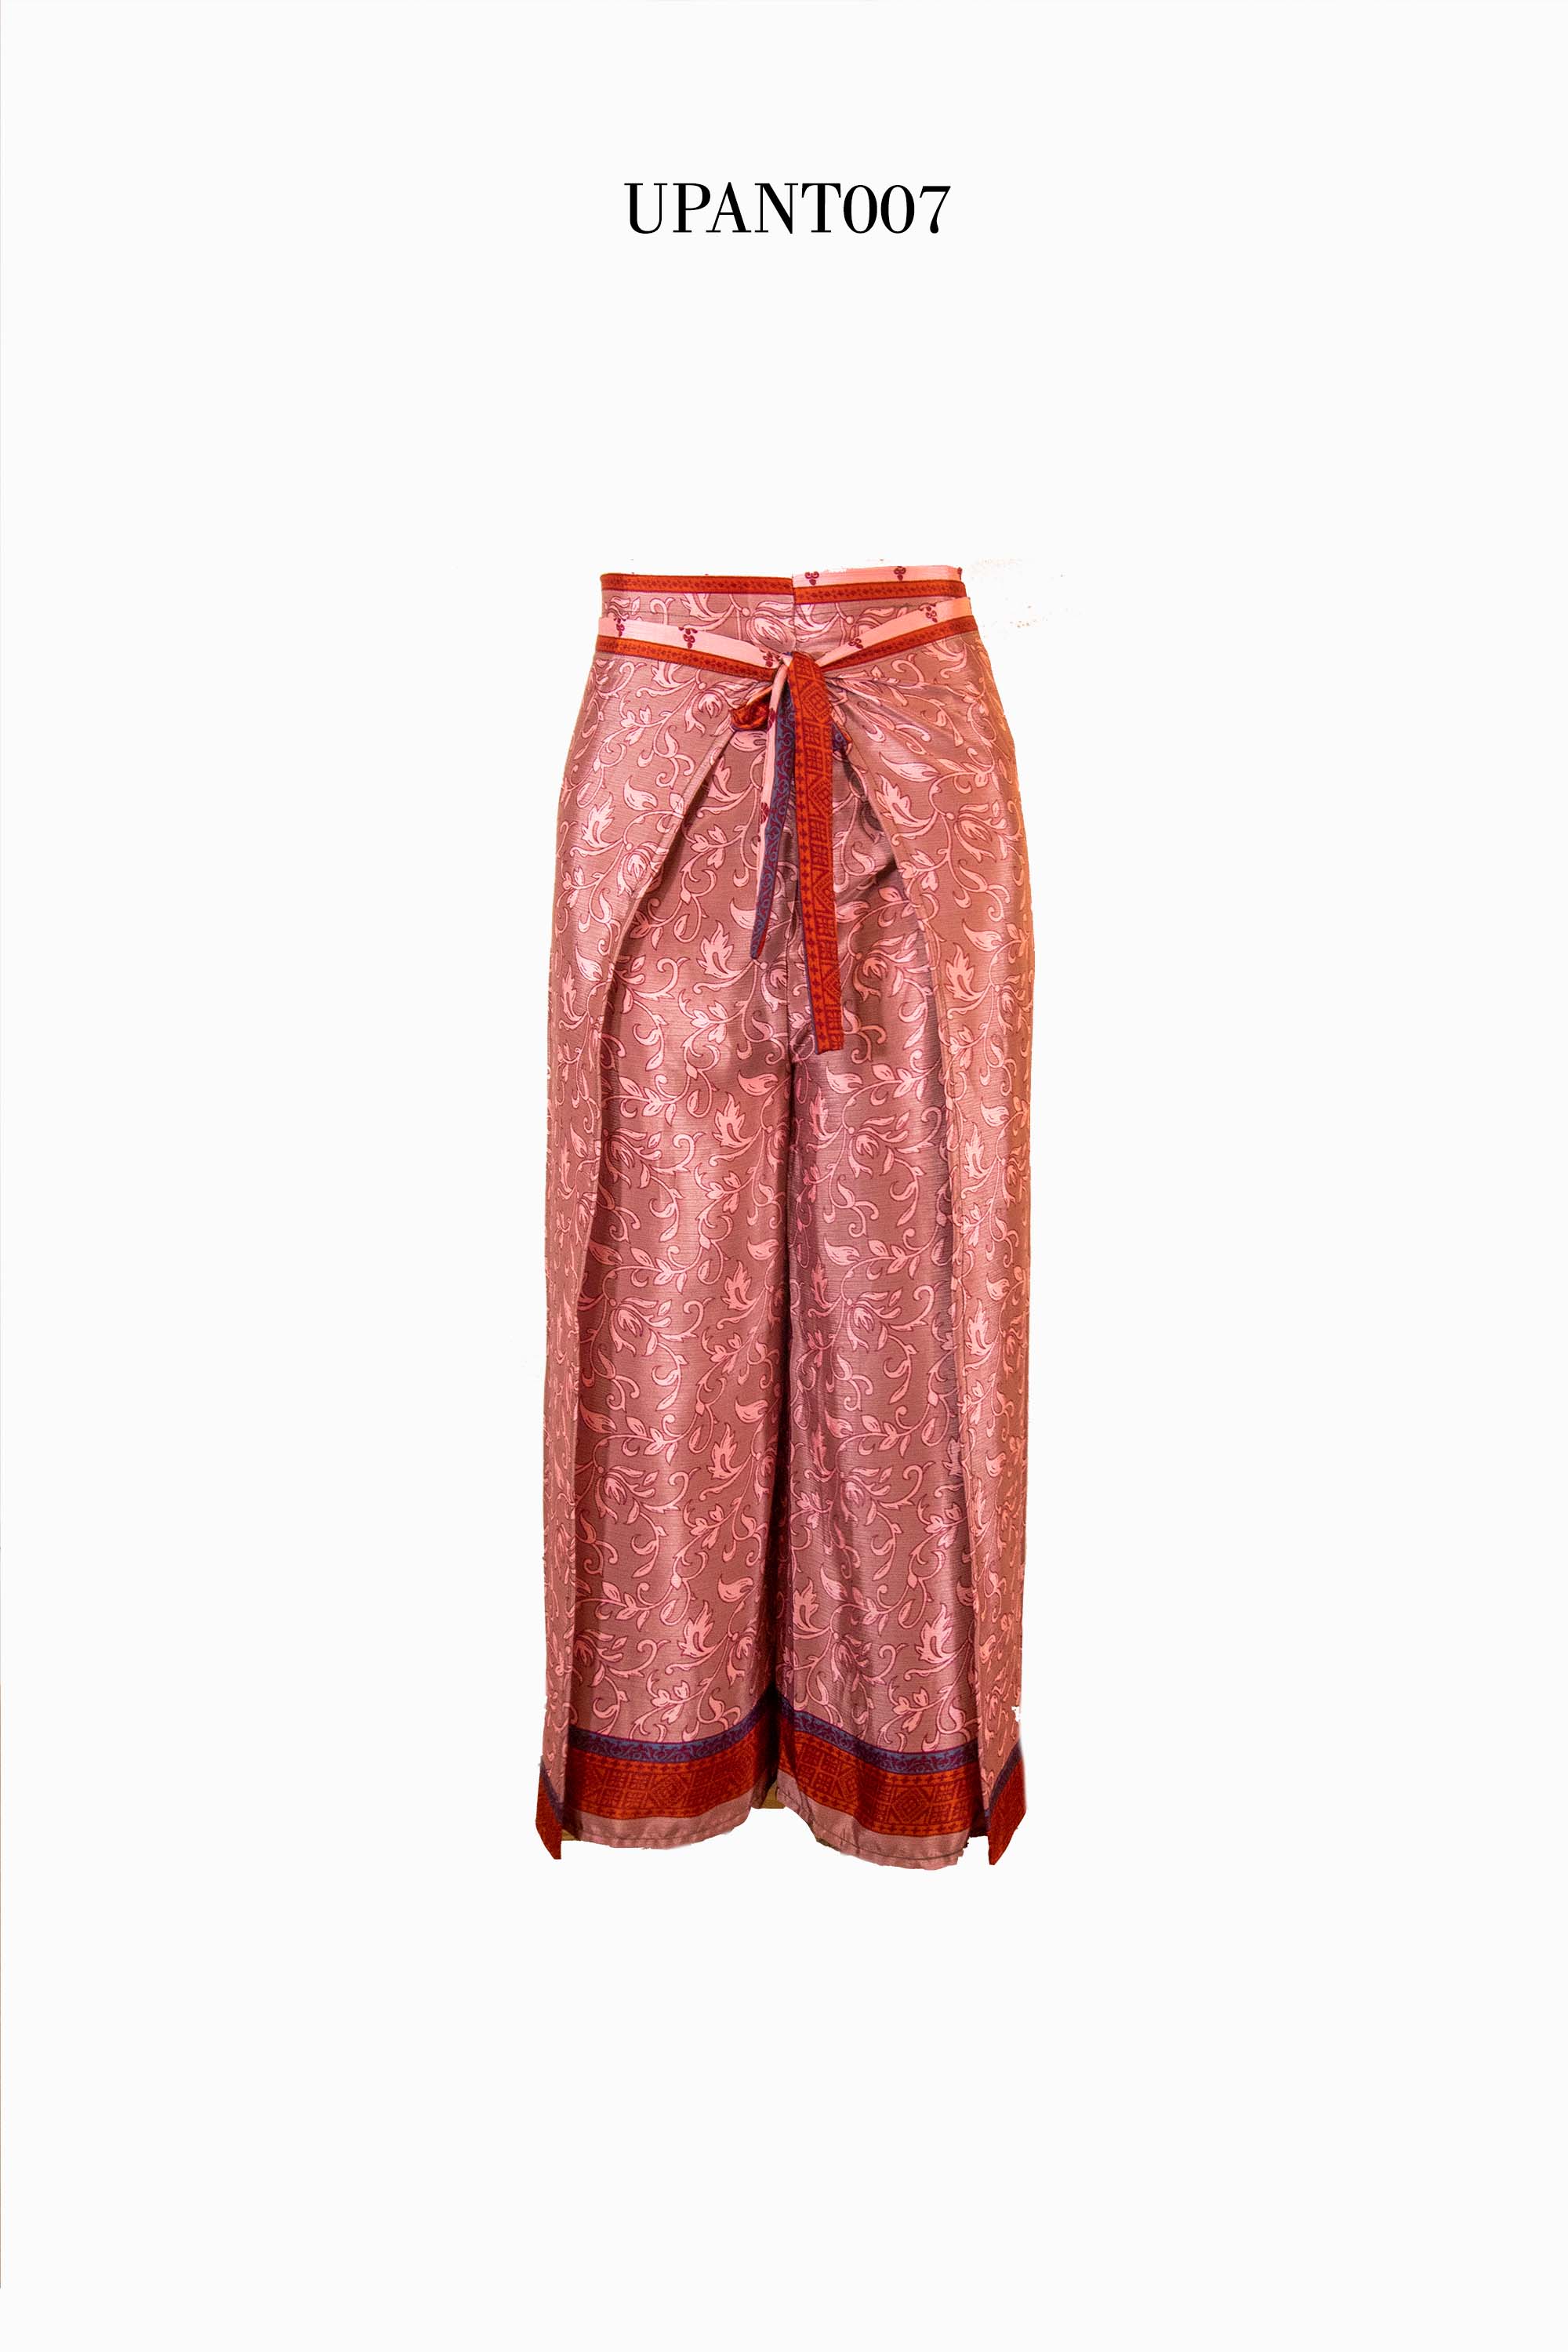 UPCYCLED PAREO PANTS (Online)